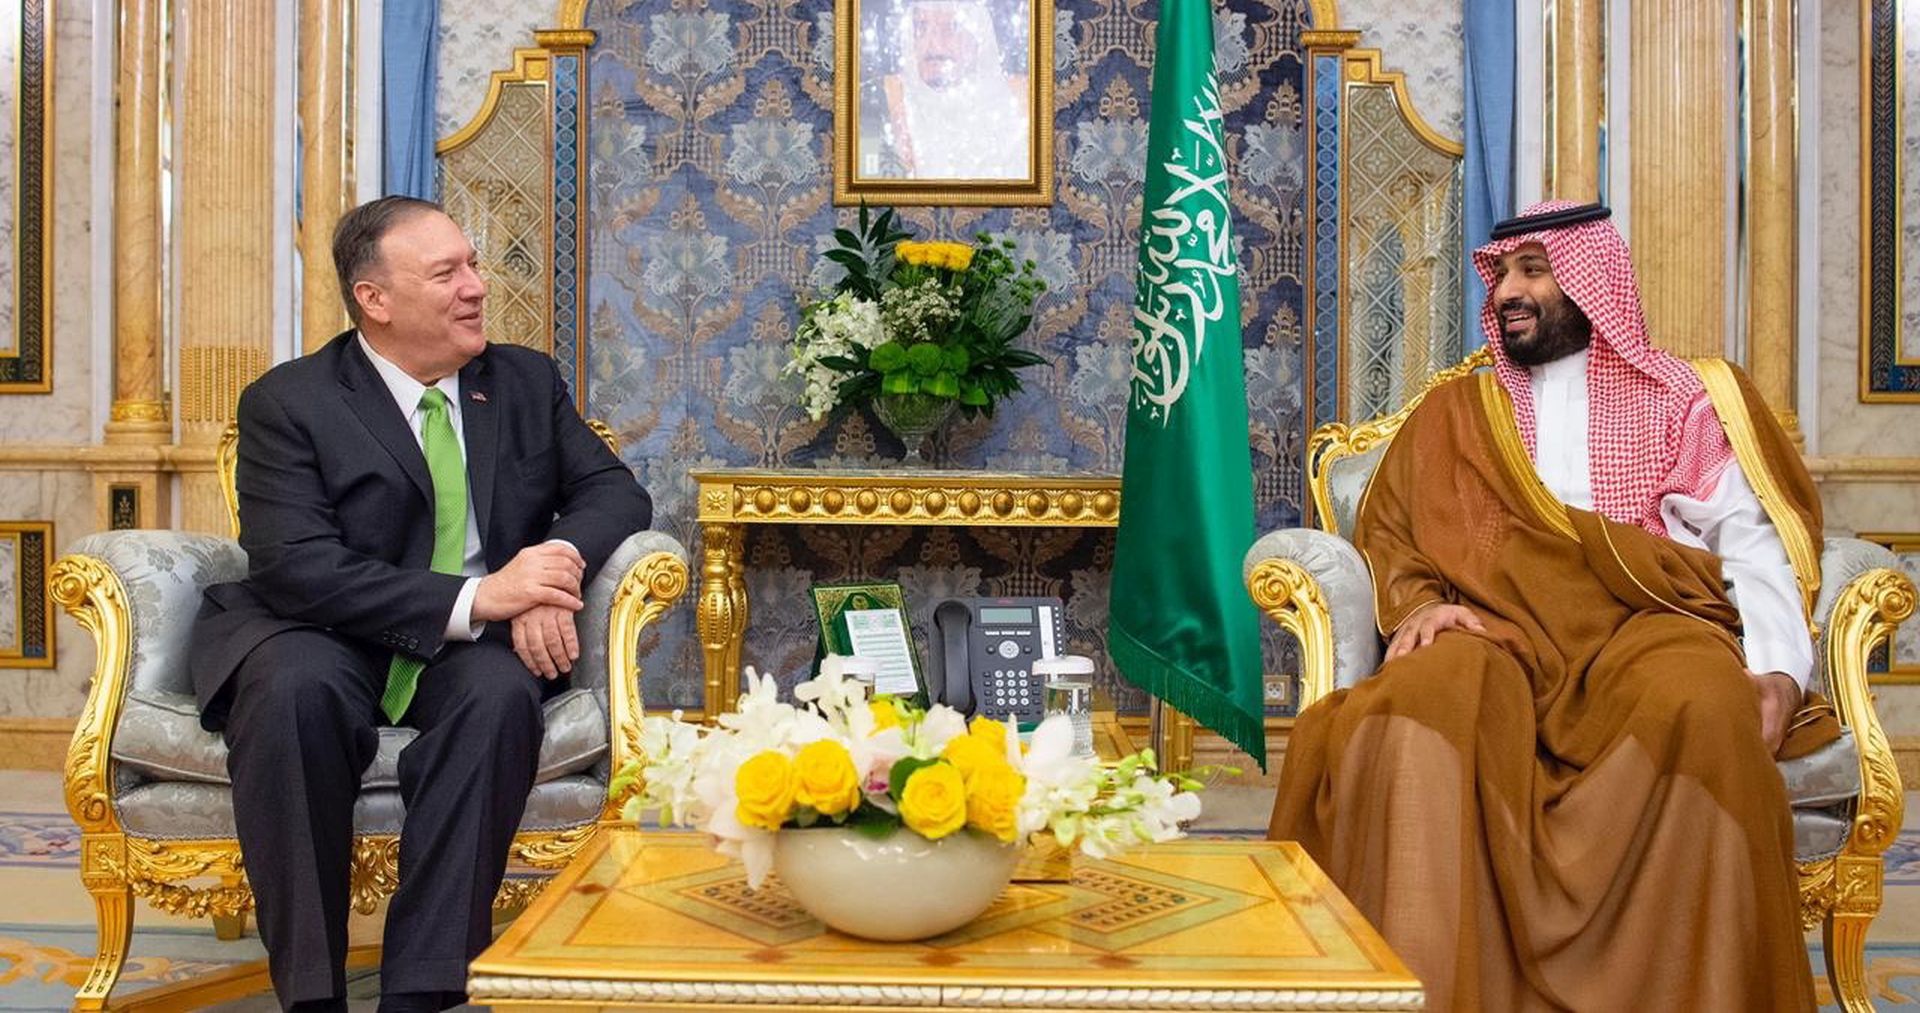 epa07851502 A handout photo made available by the Saudi Royal Court shows Saudi Crown Prince Mohammad bin Salman receiving US Secretary of State Mike Pompeo, Jeddah, Saudi Arabia, 18 September 2019. Pompeo is in Saudi Arabia to discuss the recent drone attack that blocked almost half of the Saudi oil production on 14 September 2019.  EPA/BANDAR ALJALOUD / SAUDI ROYAL COURT HANDOUT  HANDOUT EDITORIAL USE ONLY/NO SALES